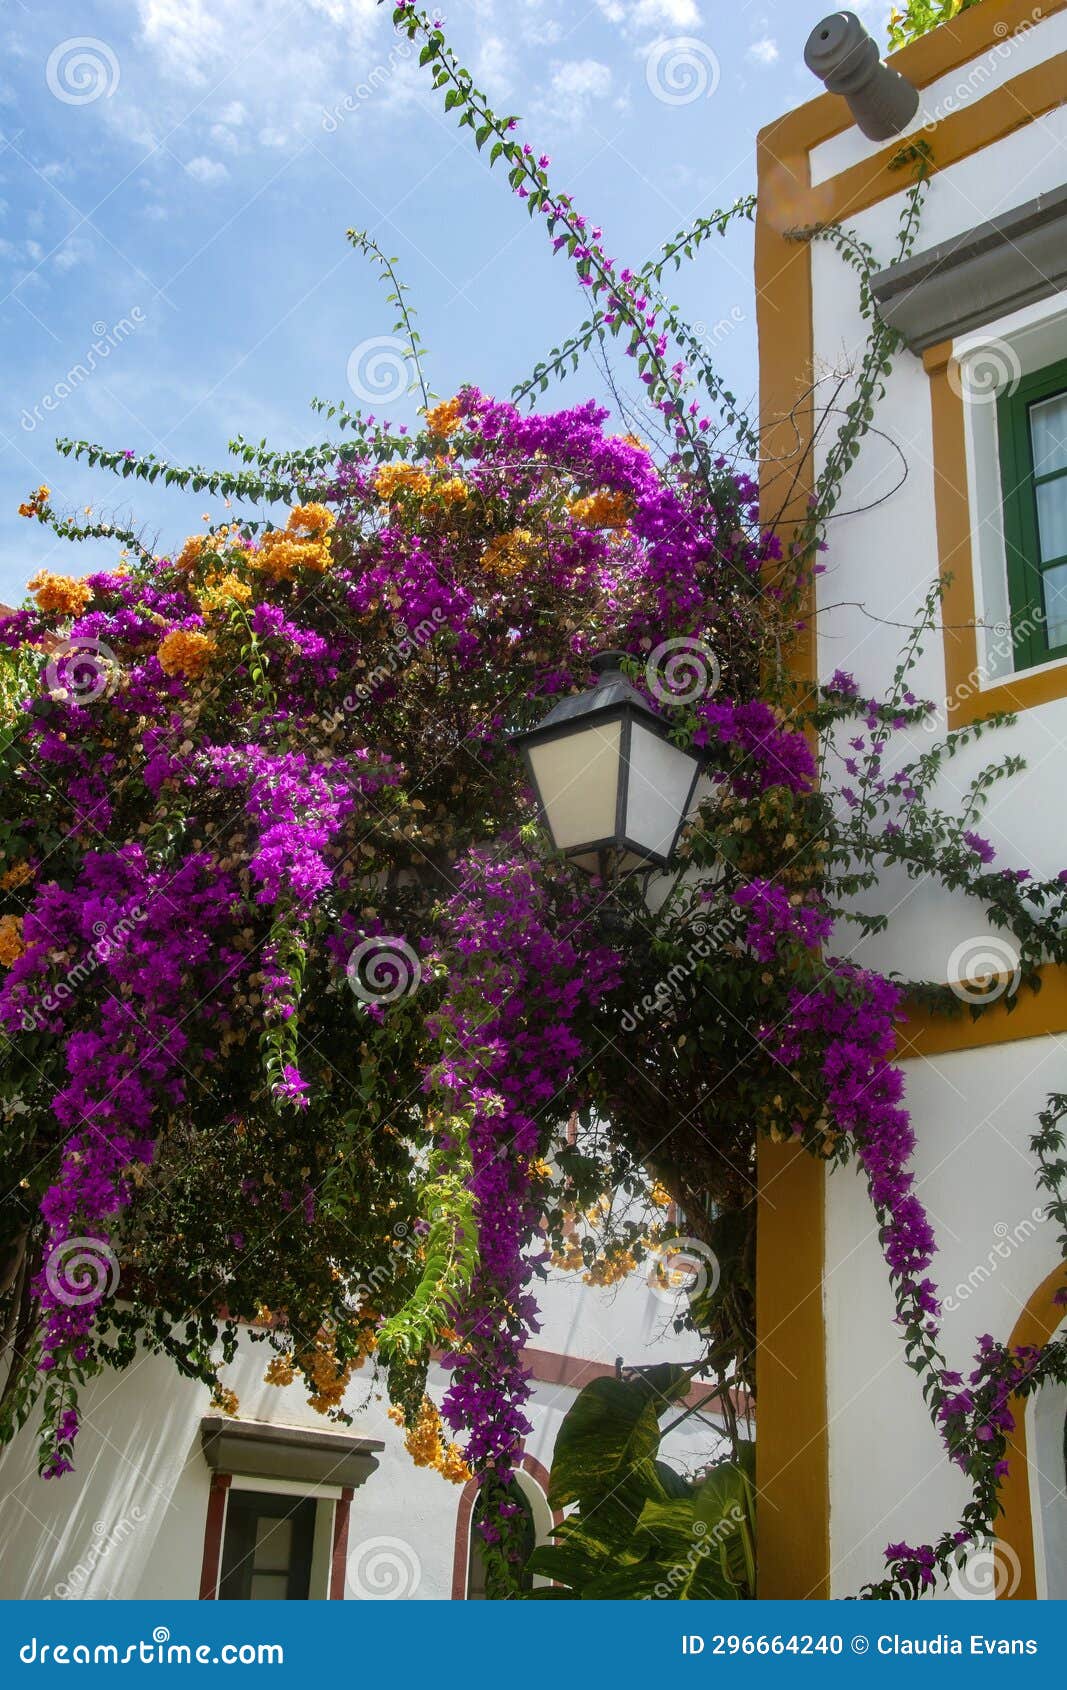 houses with flowers in the spanish town of puerto de mogan